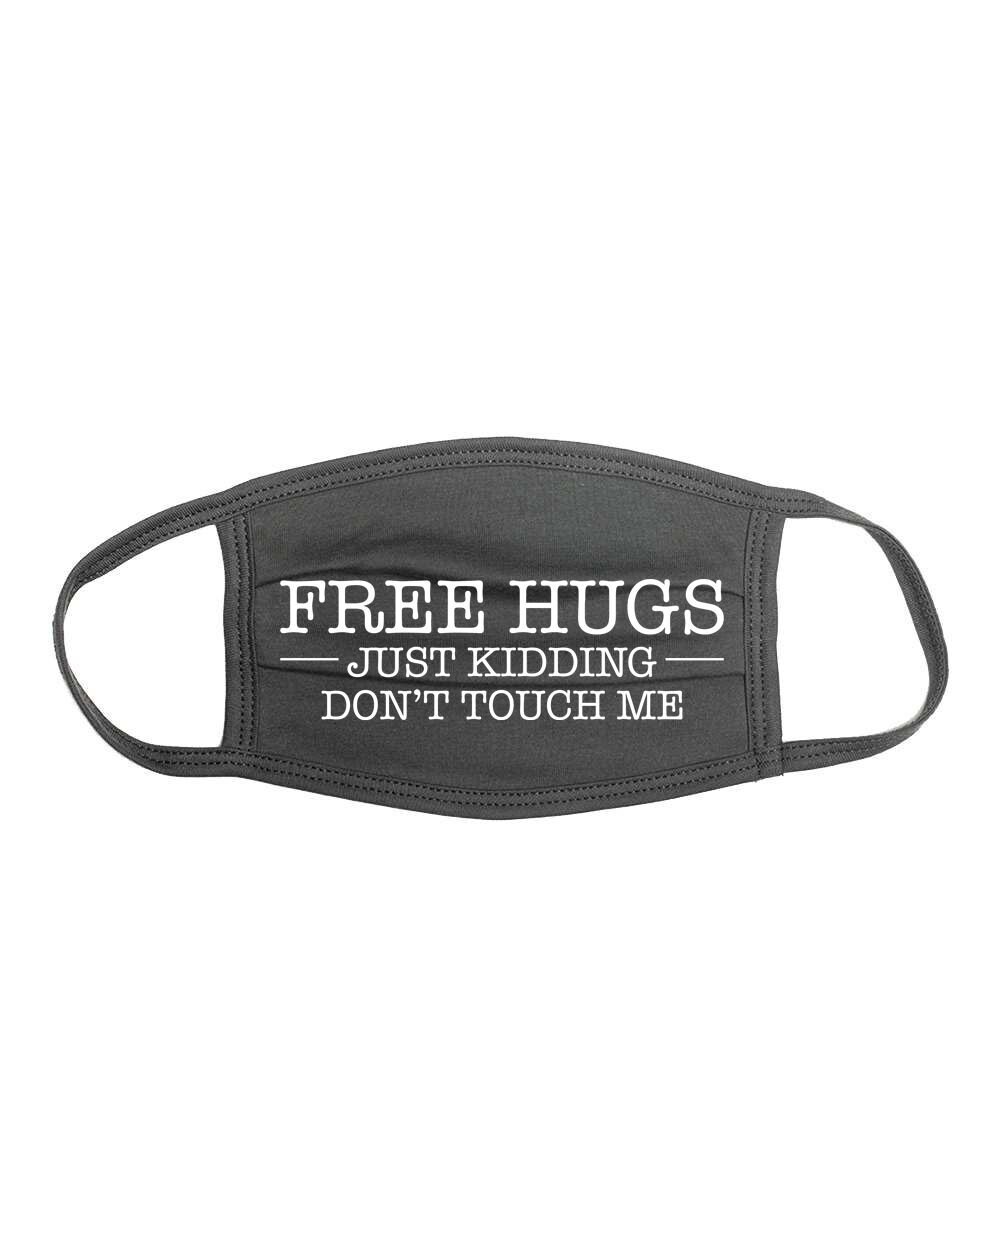 18x18 Zone Multicolor 365 Funny Sarcastic Saying Free Hug Just Kidding Don't Touch Me-Funny Sarcastic Gift Throw Pillow 